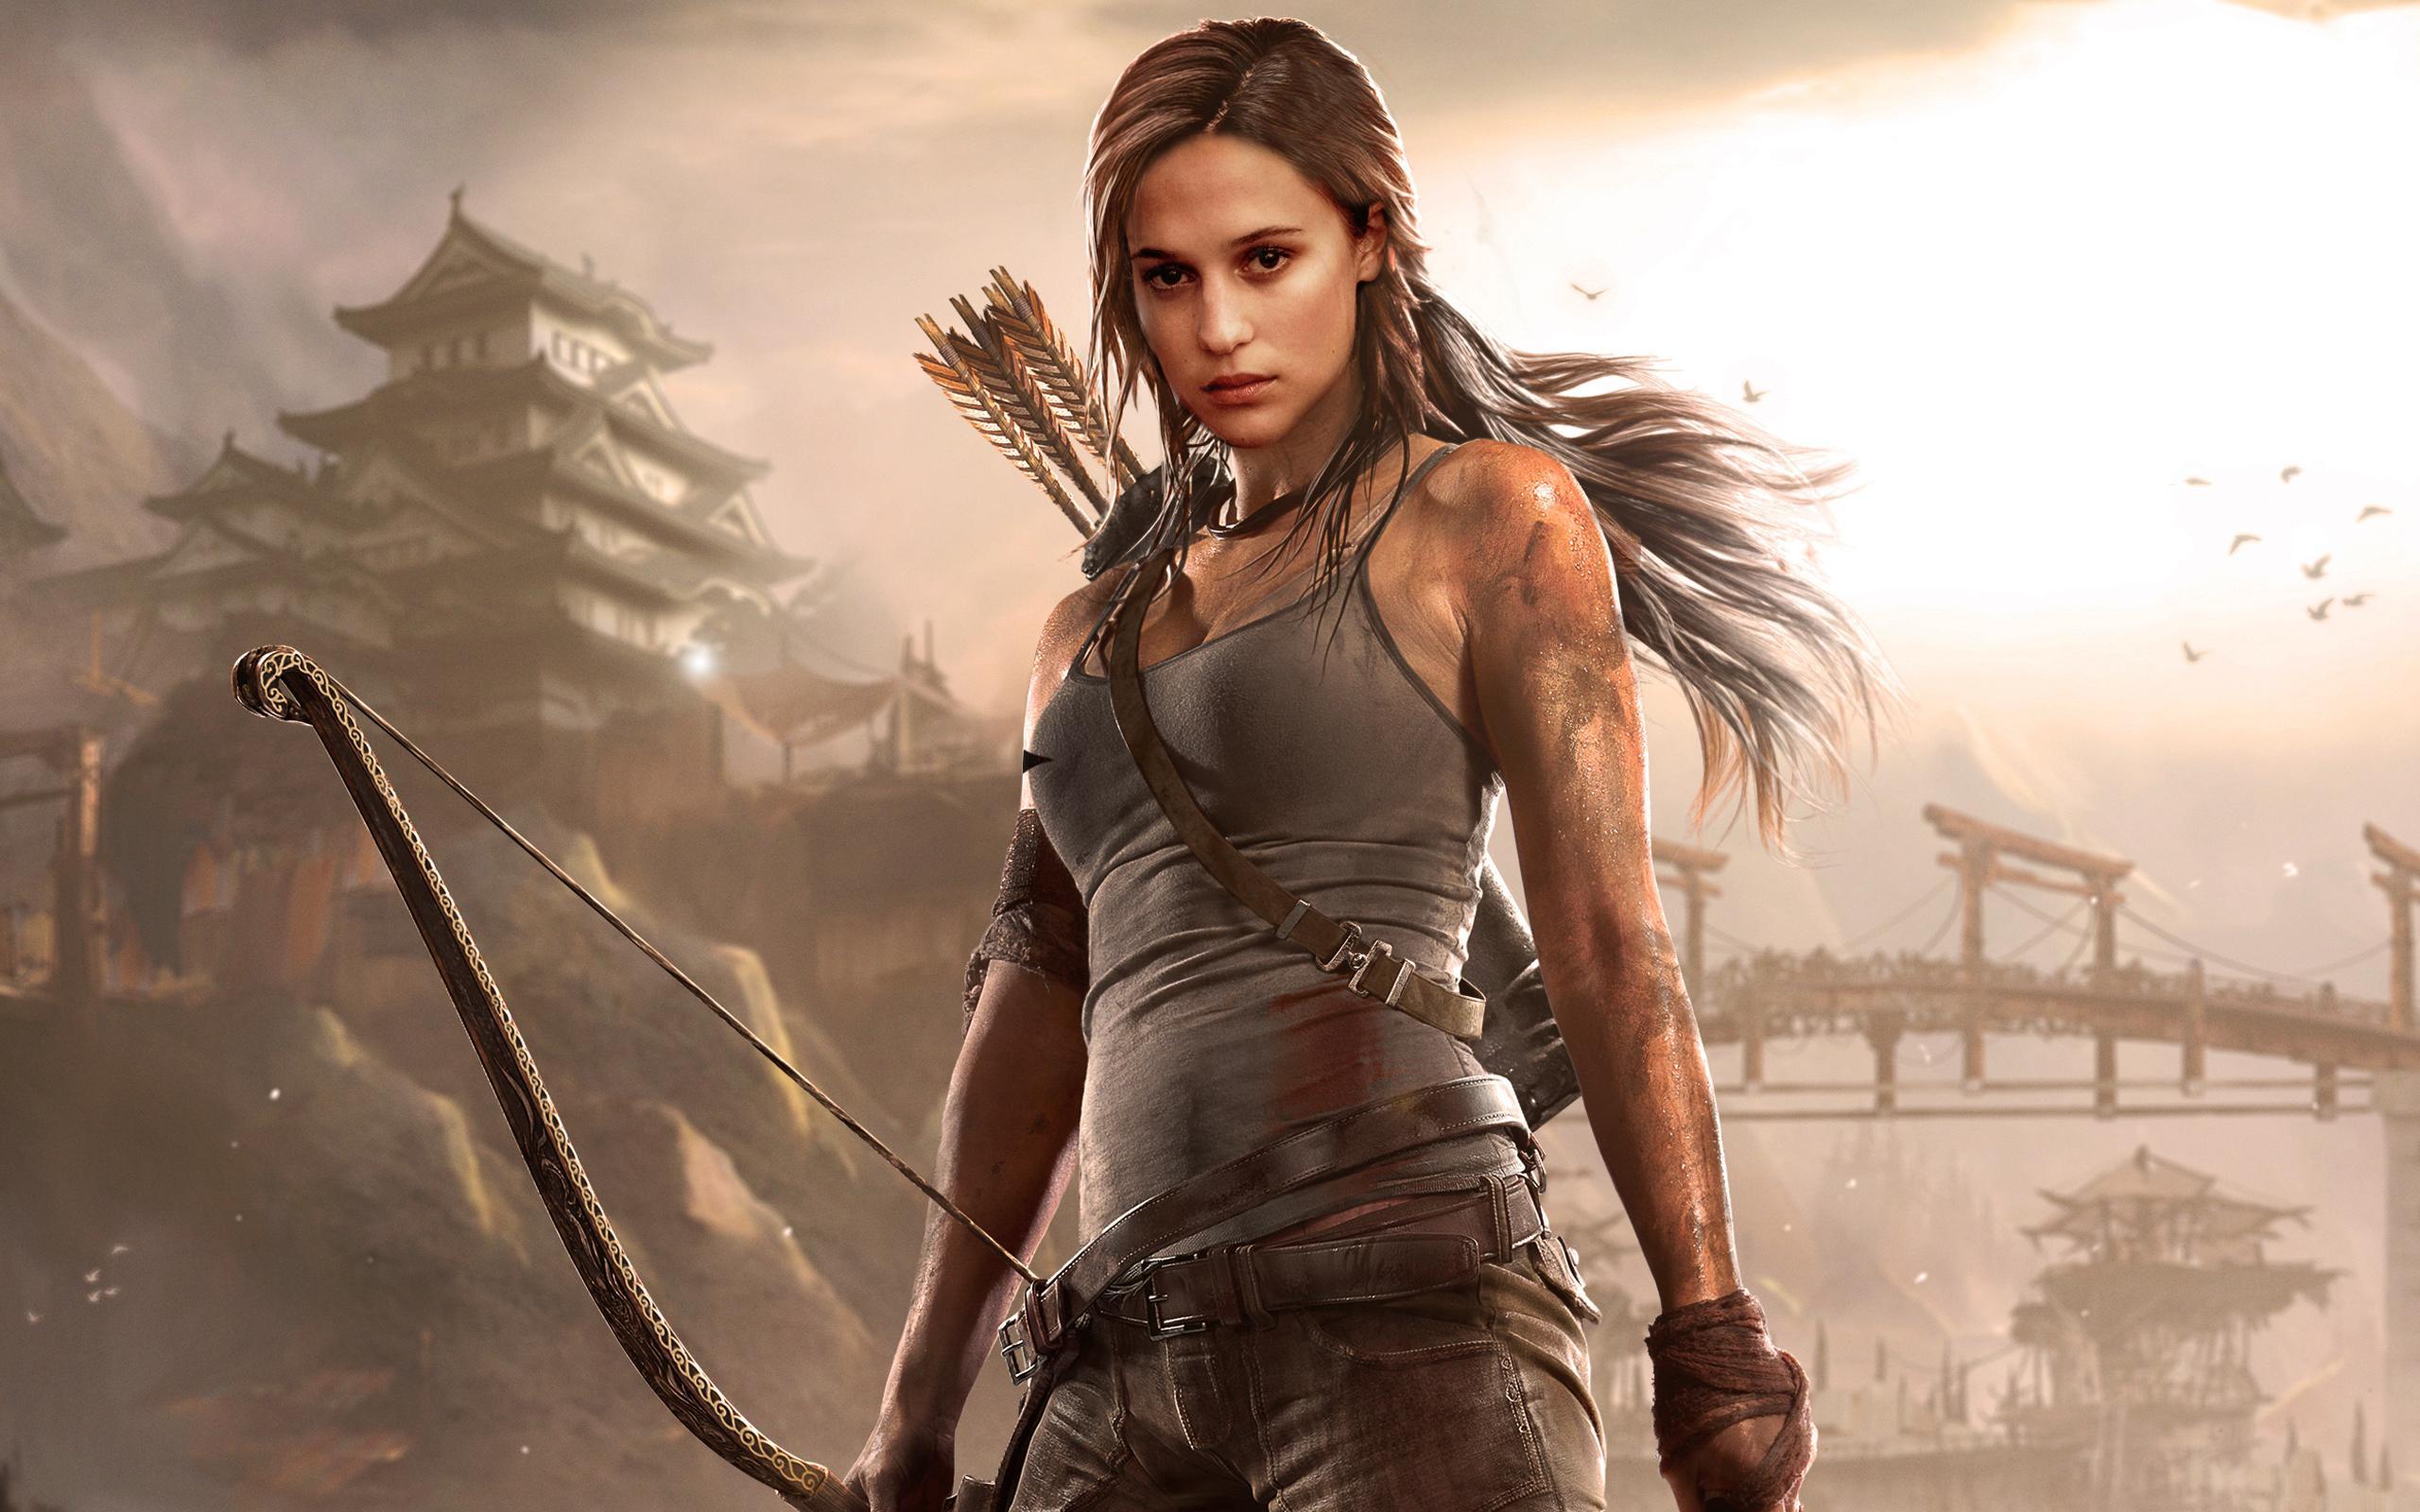 First image emerge of Alicia Vikander as Lara Croft in 'Tomb